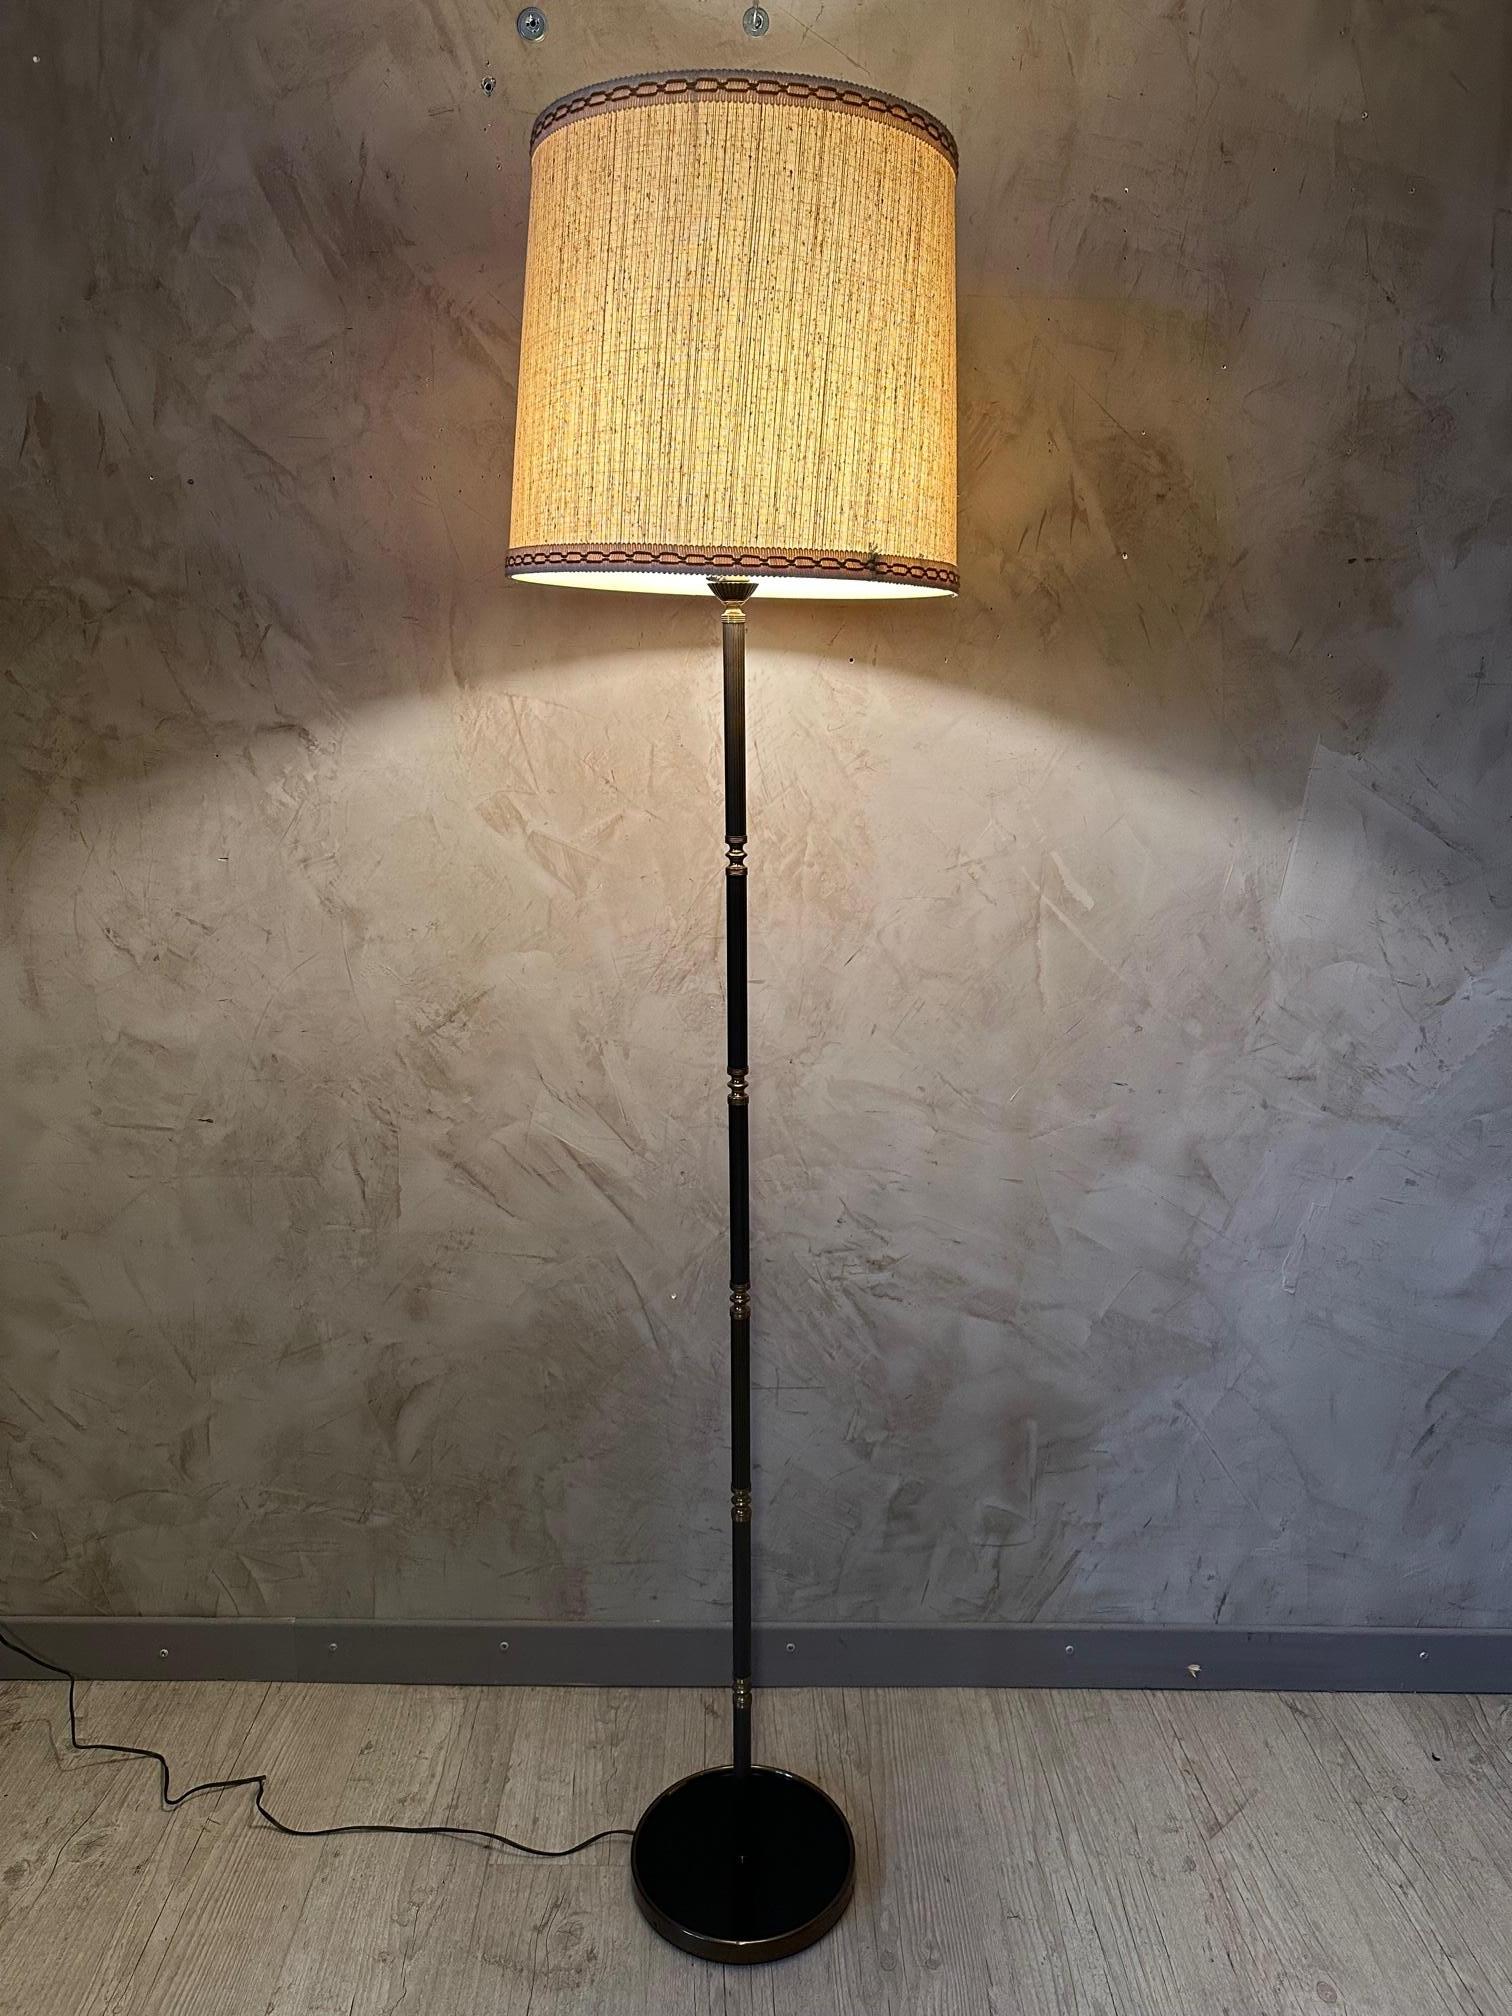 Metal and brass floor lamp from the 50s/60s with a large beige lampshade. Switch on the floor lamp. Nice ambient light.
​